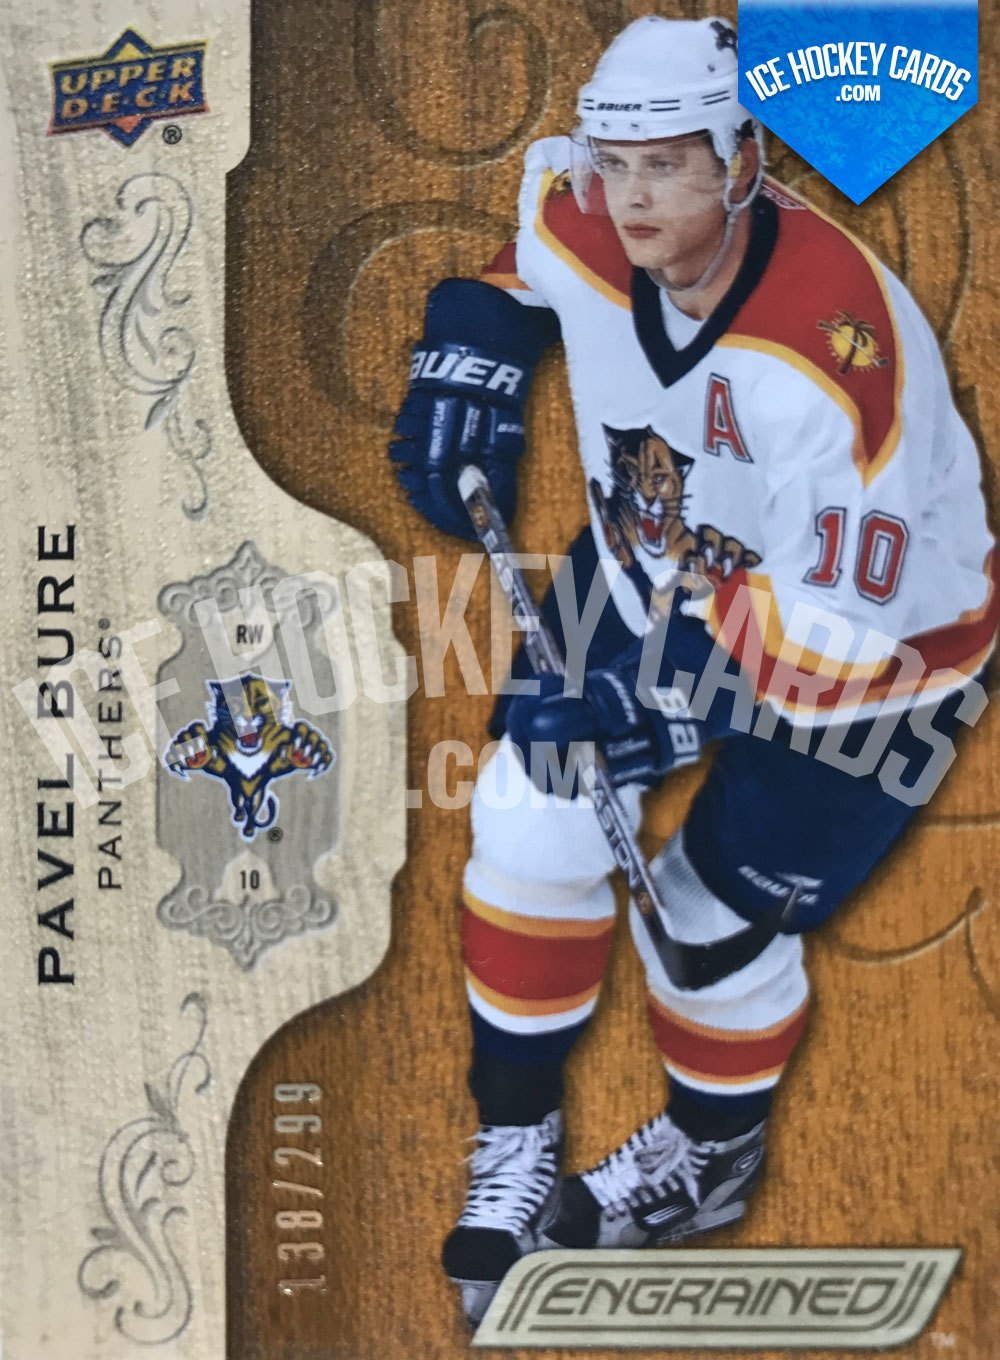 Pavel Bure Was One Of The Sickest Goal Scorers The NHL Has Ever